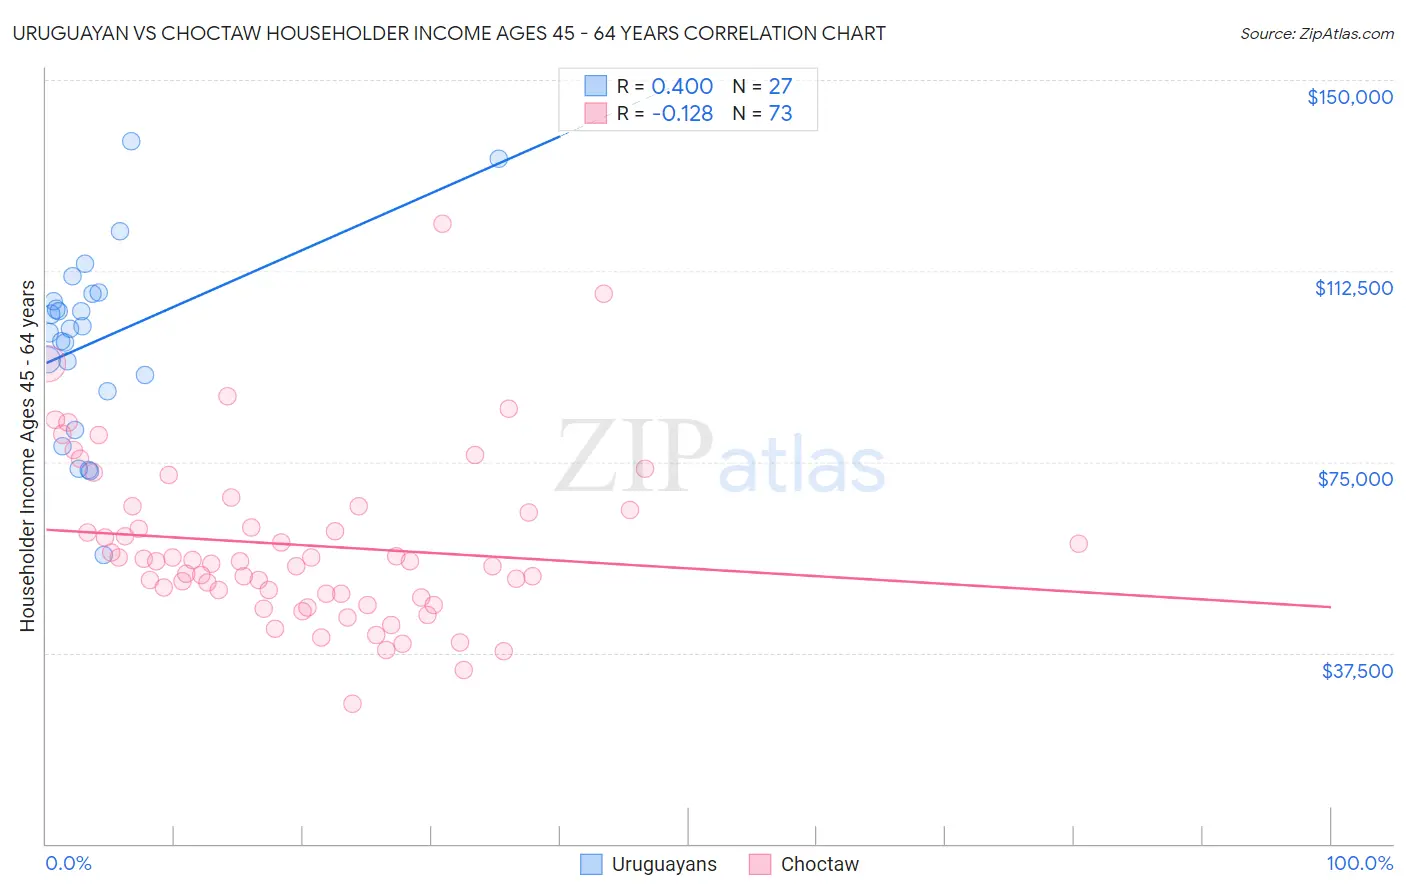 Uruguayan vs Choctaw Householder Income Ages 45 - 64 years